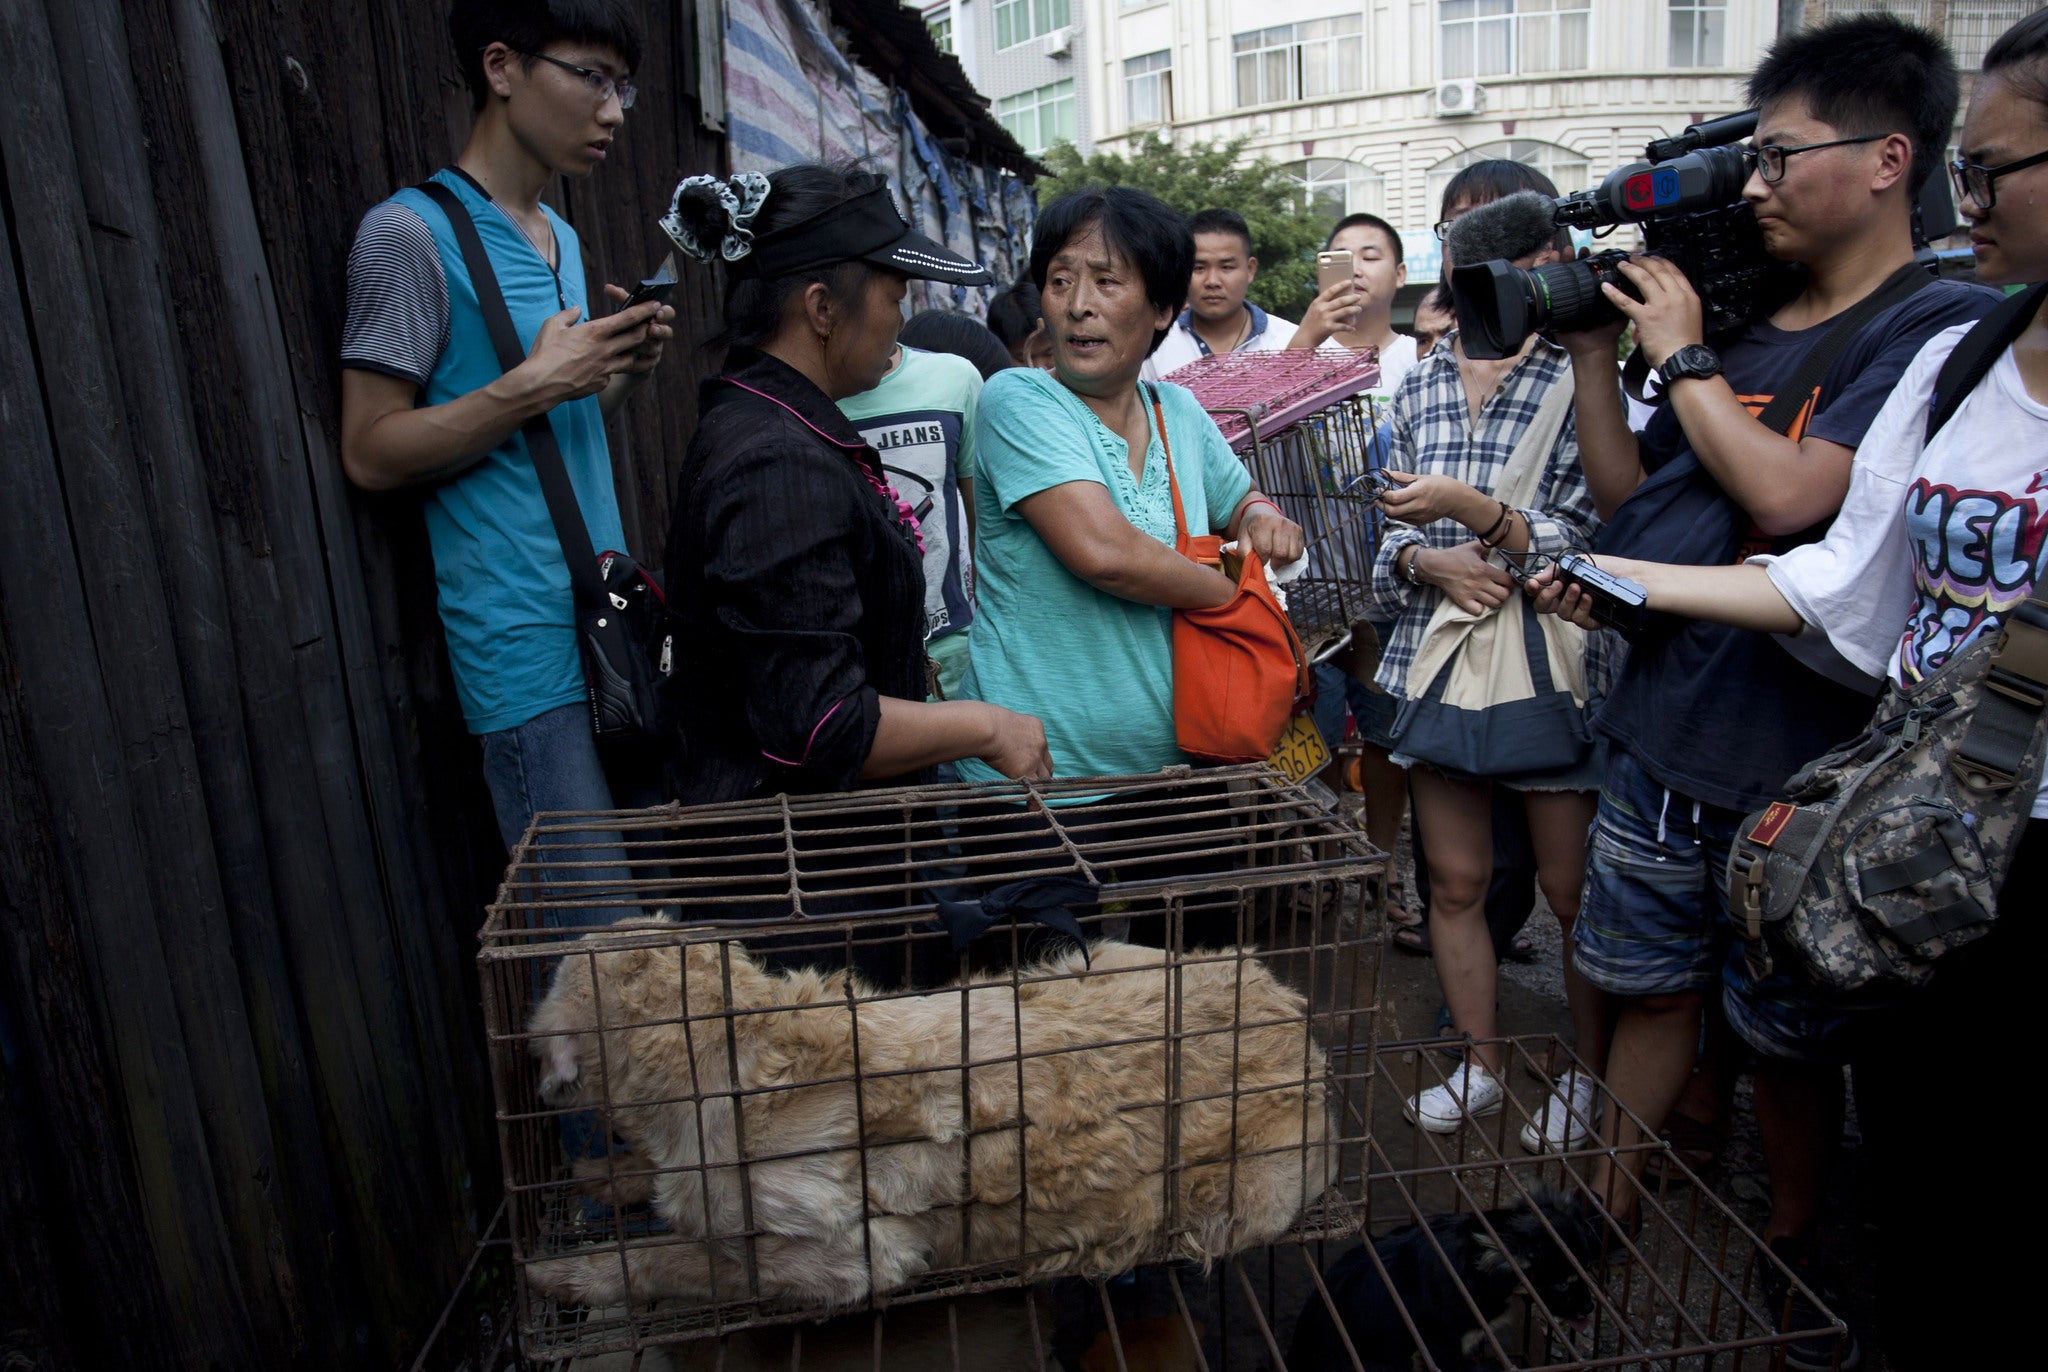 Crowds gathered after Yang Xiaoyun came to the market and announced she wanted to purchase 100 dogs (China Out/AFP/Getty Images)